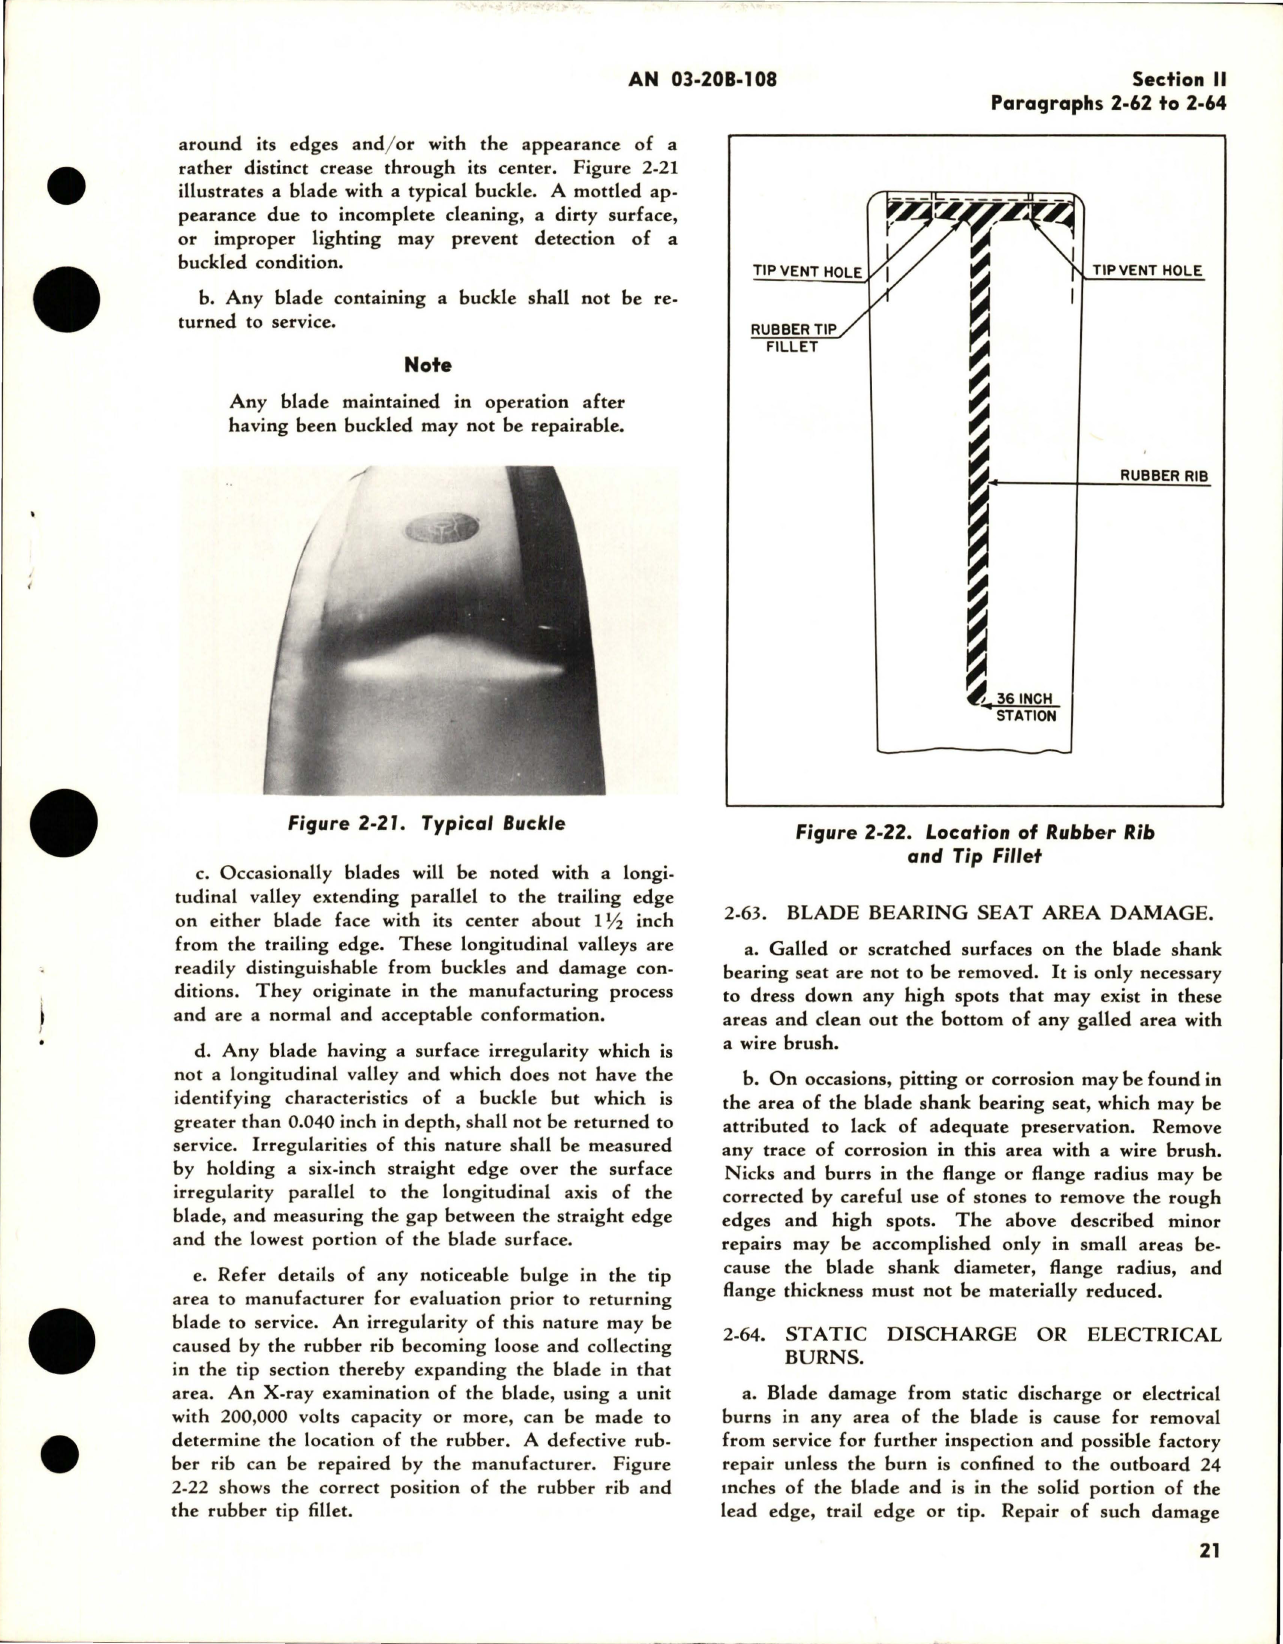 Sample page 5 from AirCorps Library document: Overhaul Instructions for Pitch Lever Type Electric Propeller - Model C42S-C24 